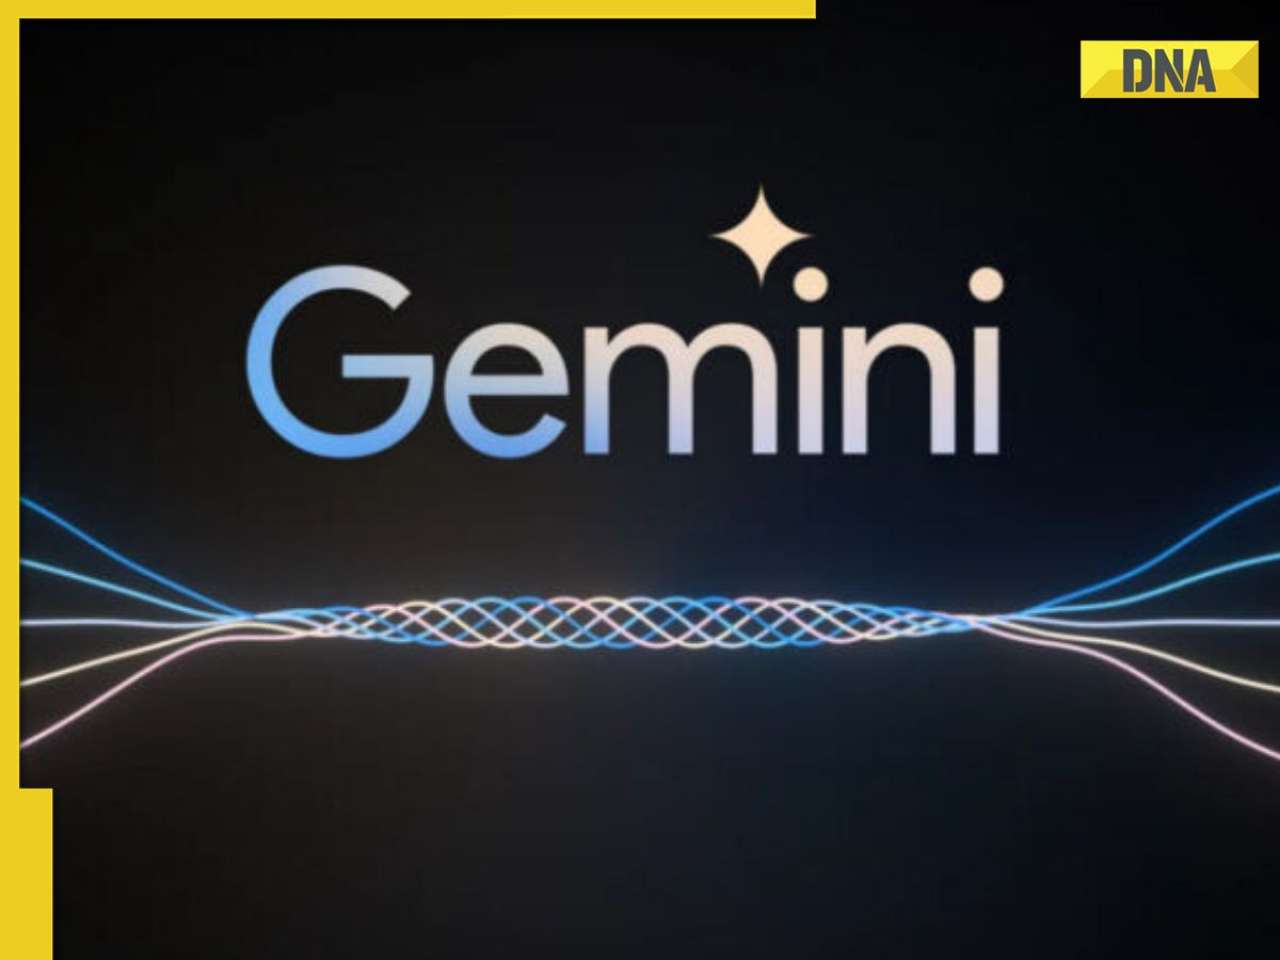 Google Gemini's mobile app launched in India, available in 9 languages